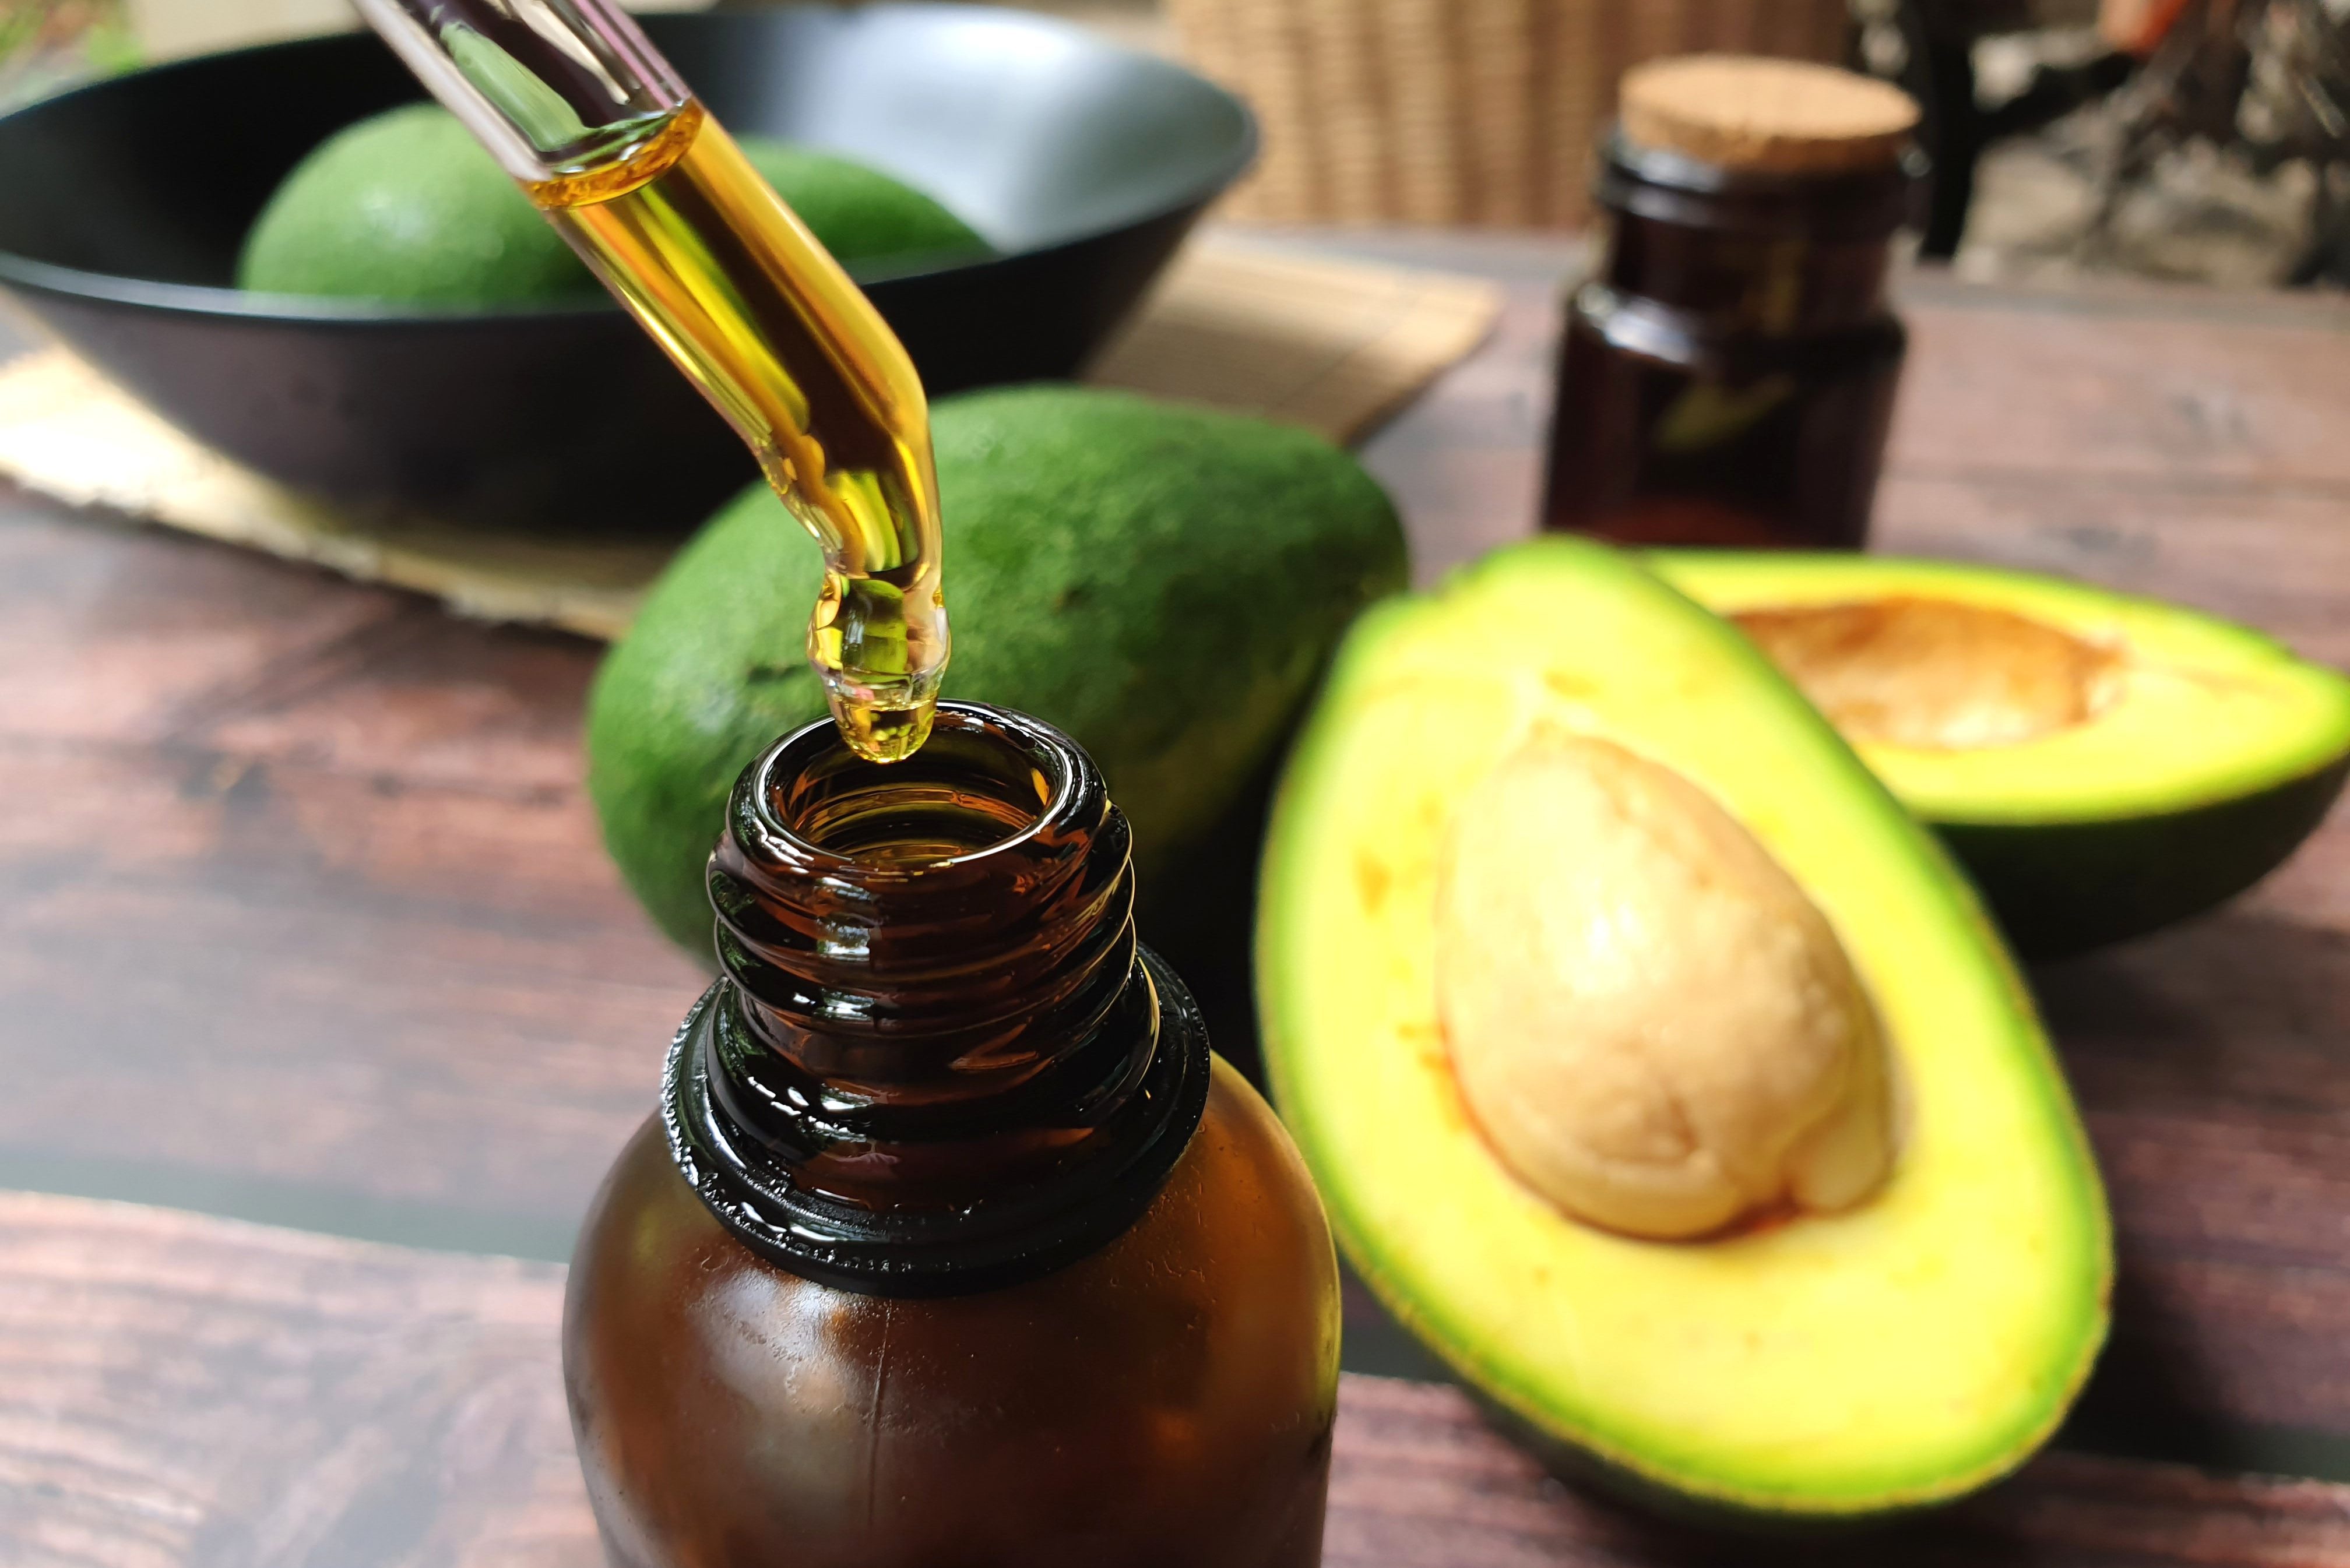 Avocados And Avocado Oil On Wooden Table